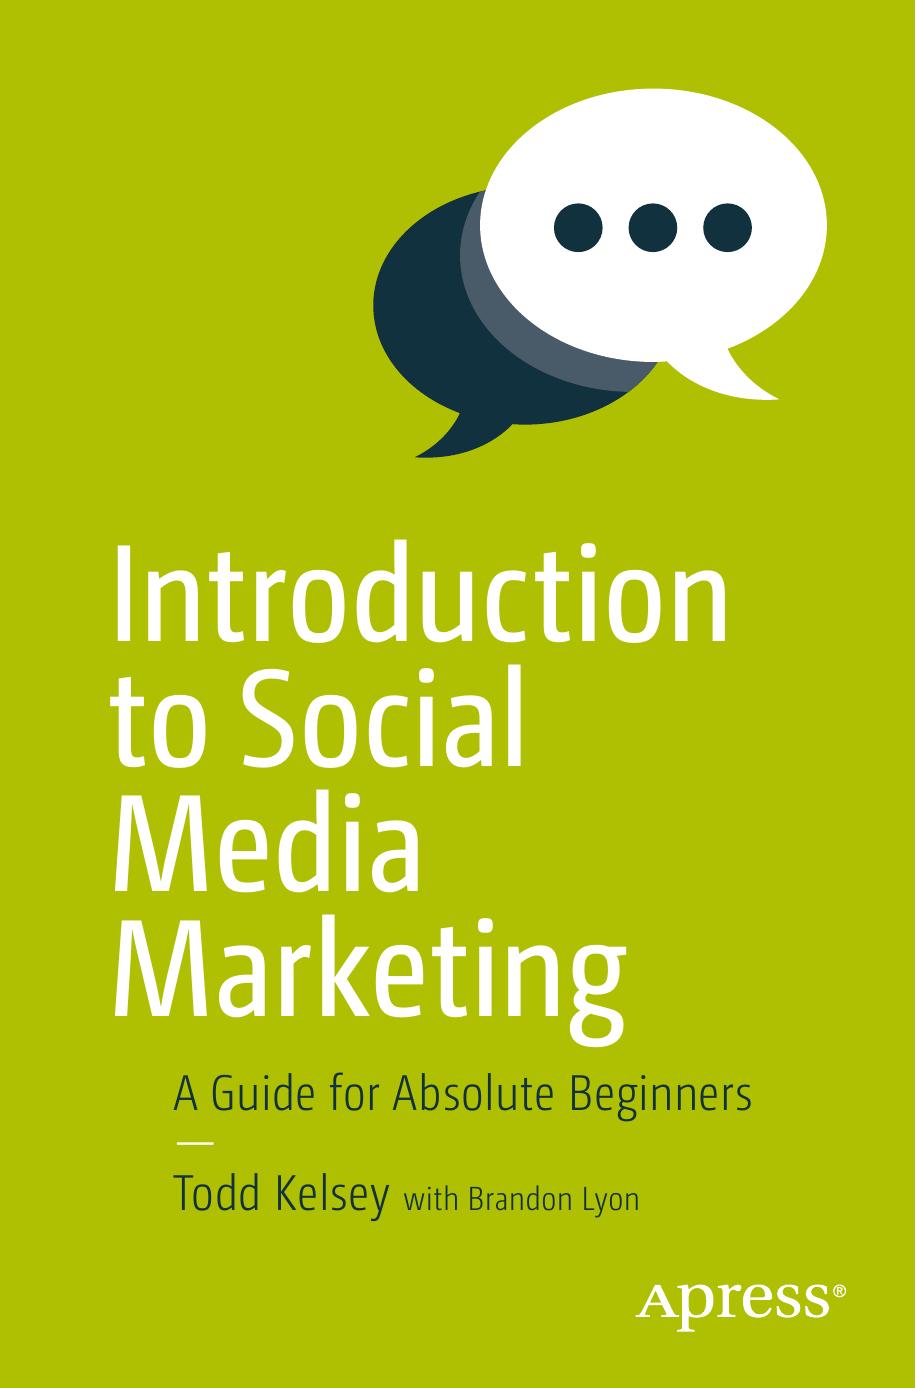 Introduction to Social Media Marketing A Guide for Absolute Beginners 2017